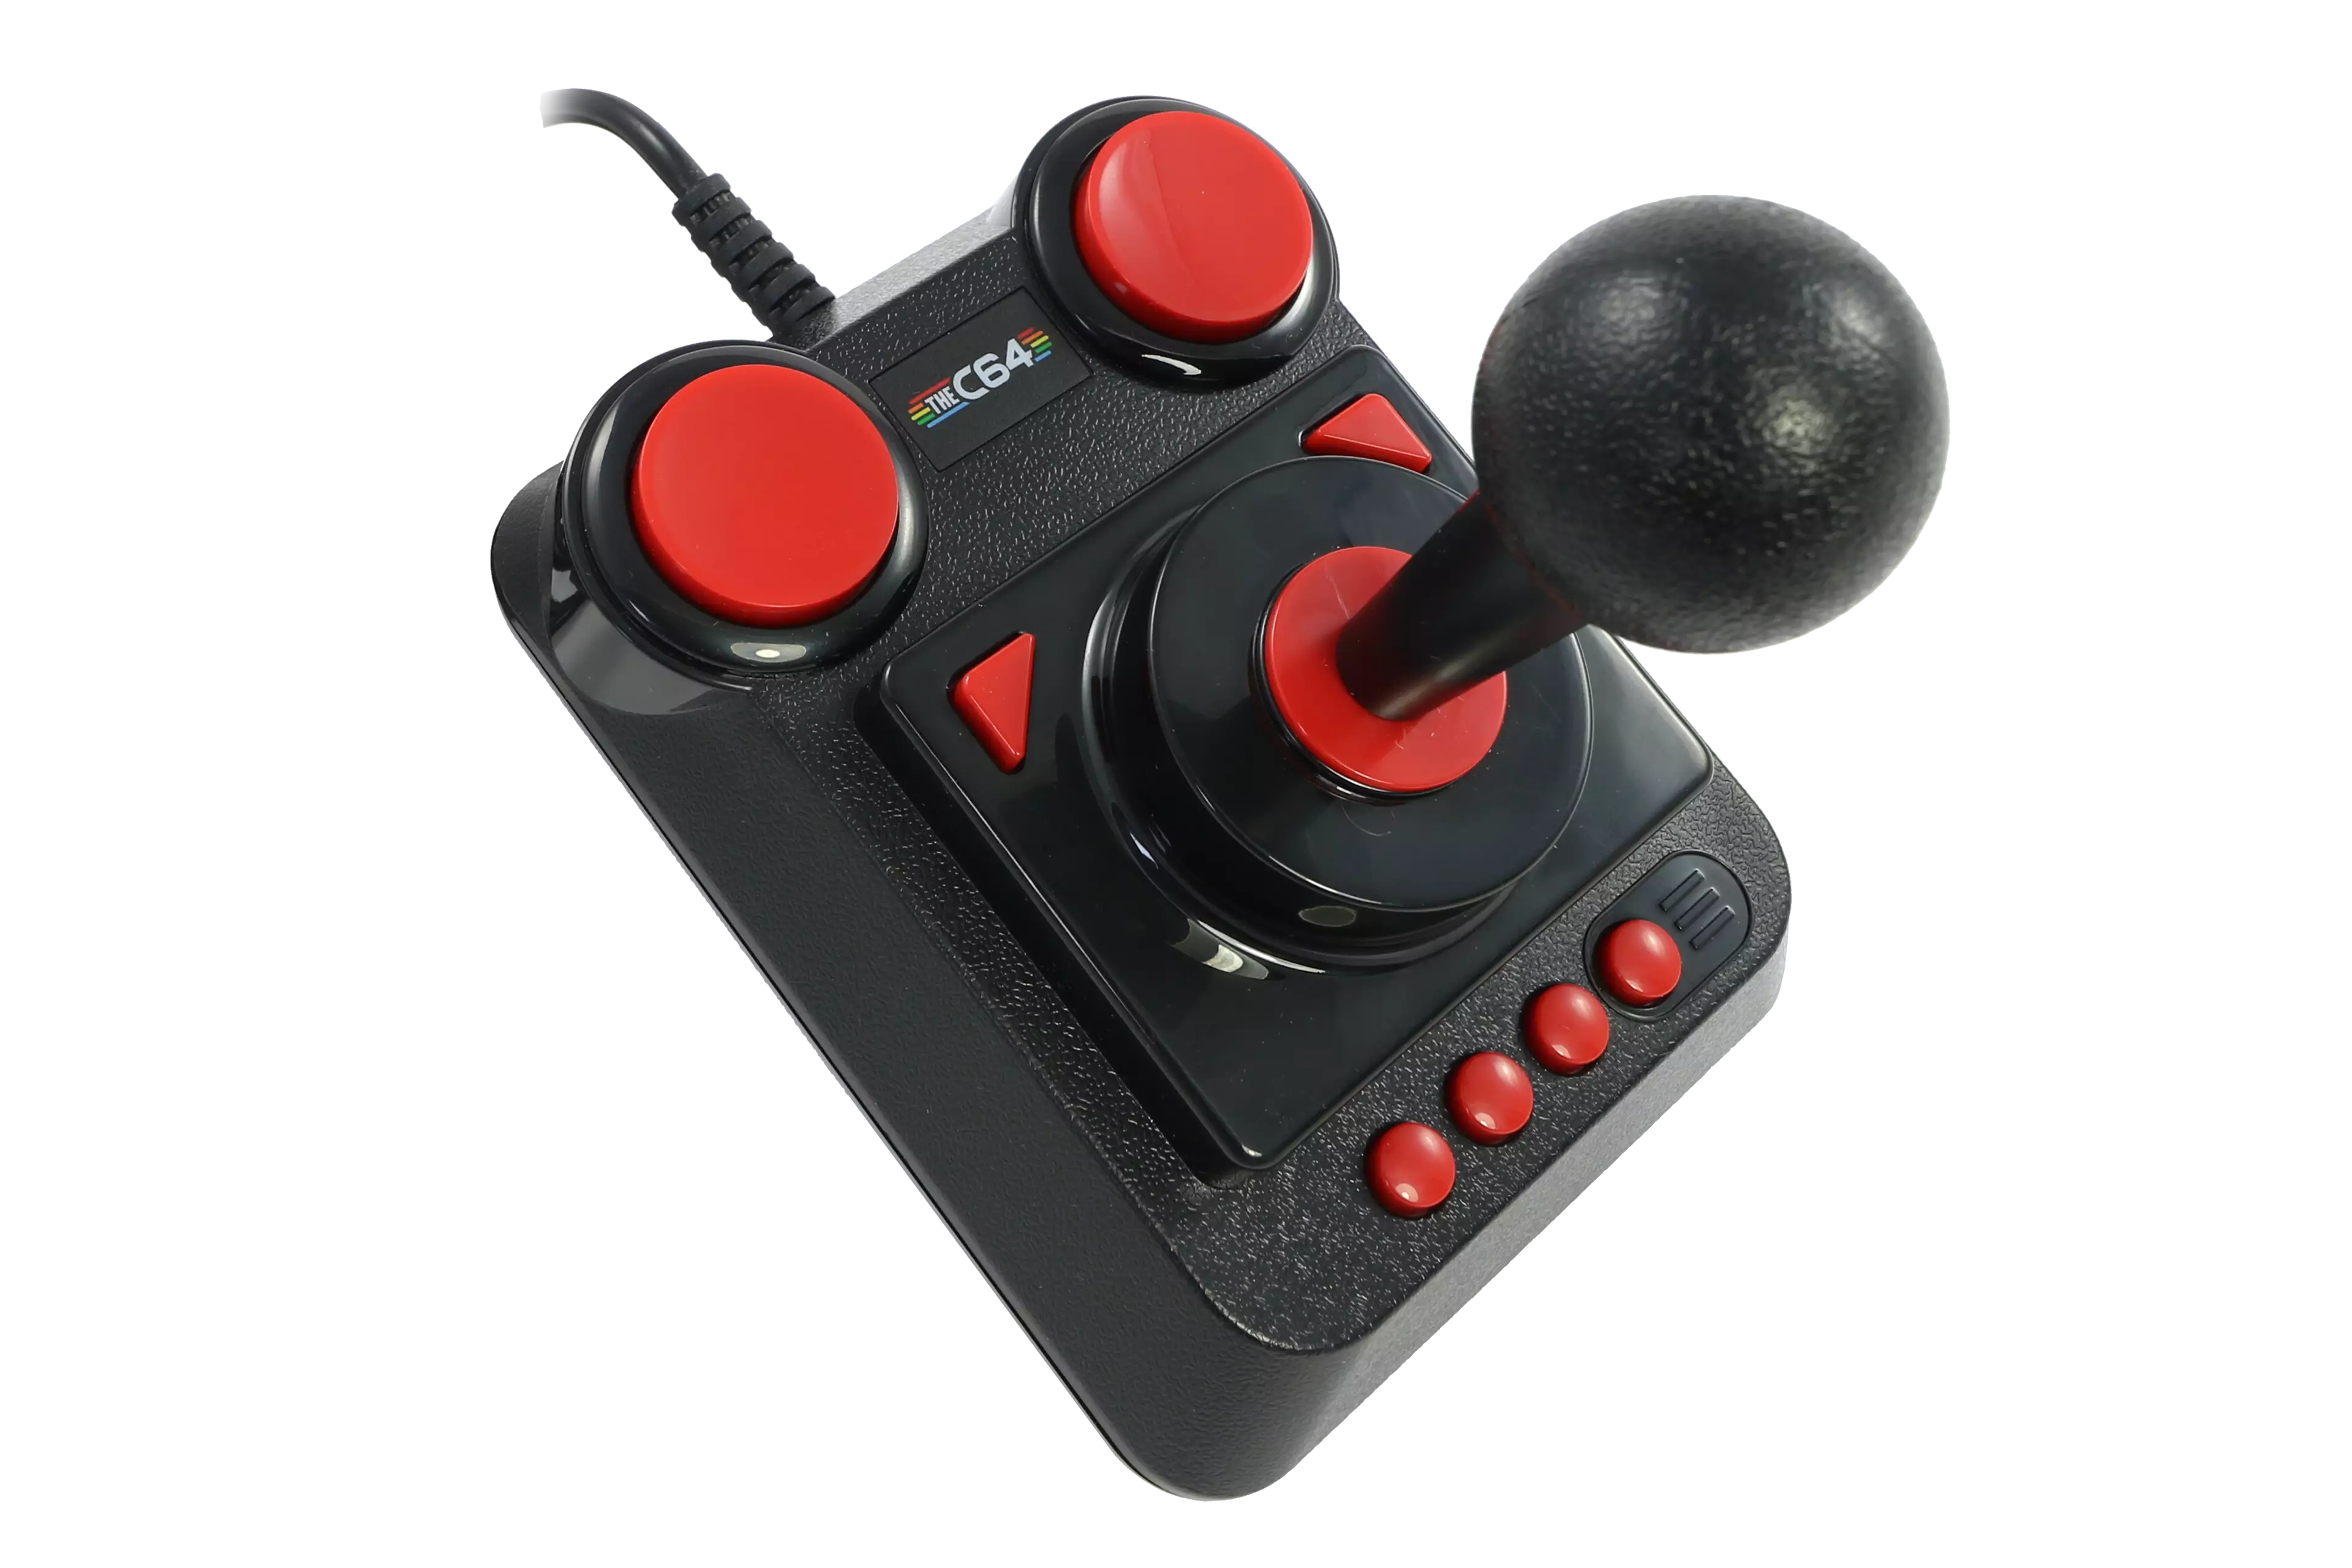 The C64's included joystick